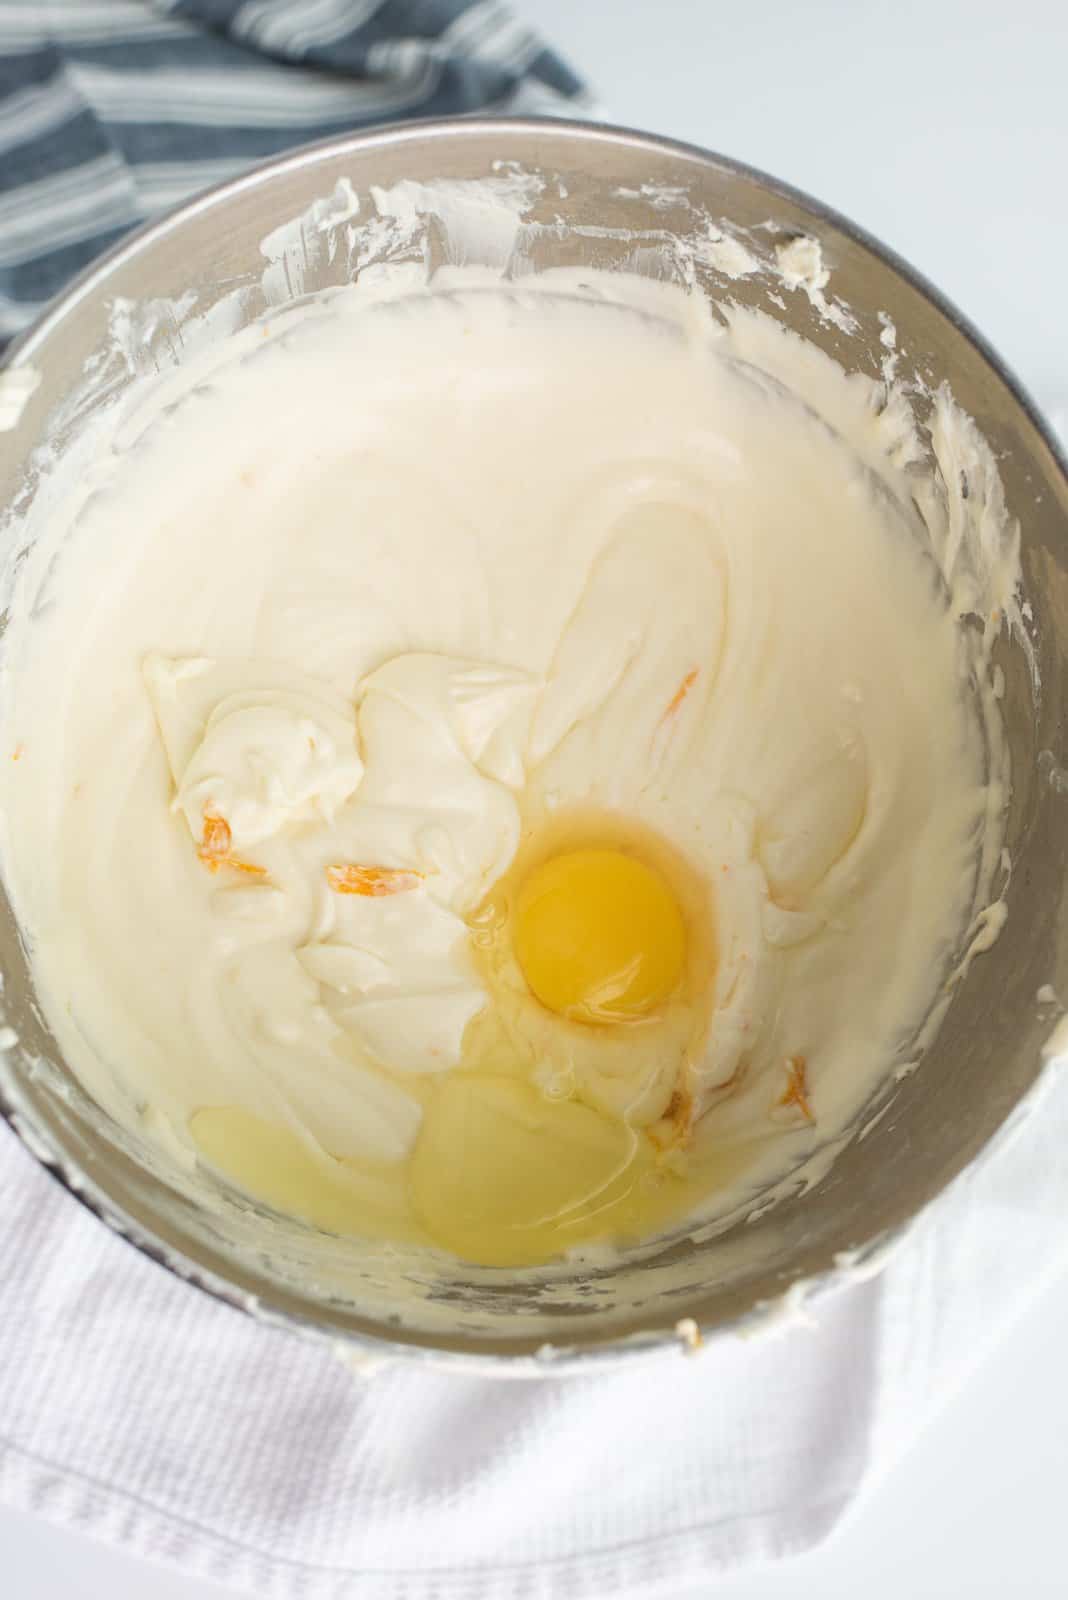 Eggs and heavy cream added to cheesecake mixture.